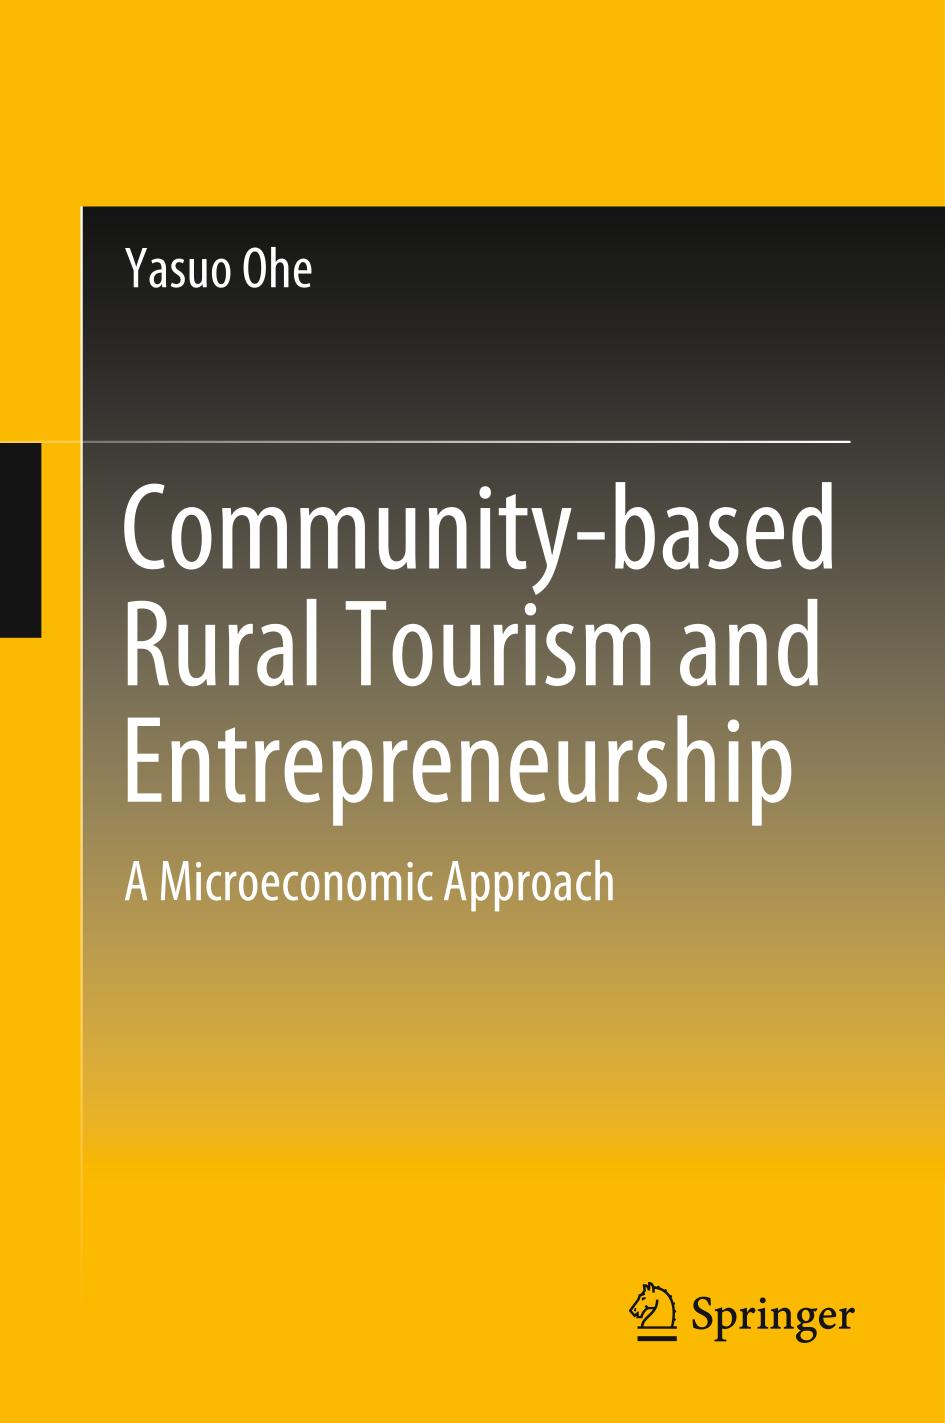 Community-based Rural Tourism and Entrepreneurship A Microeconomic Approach